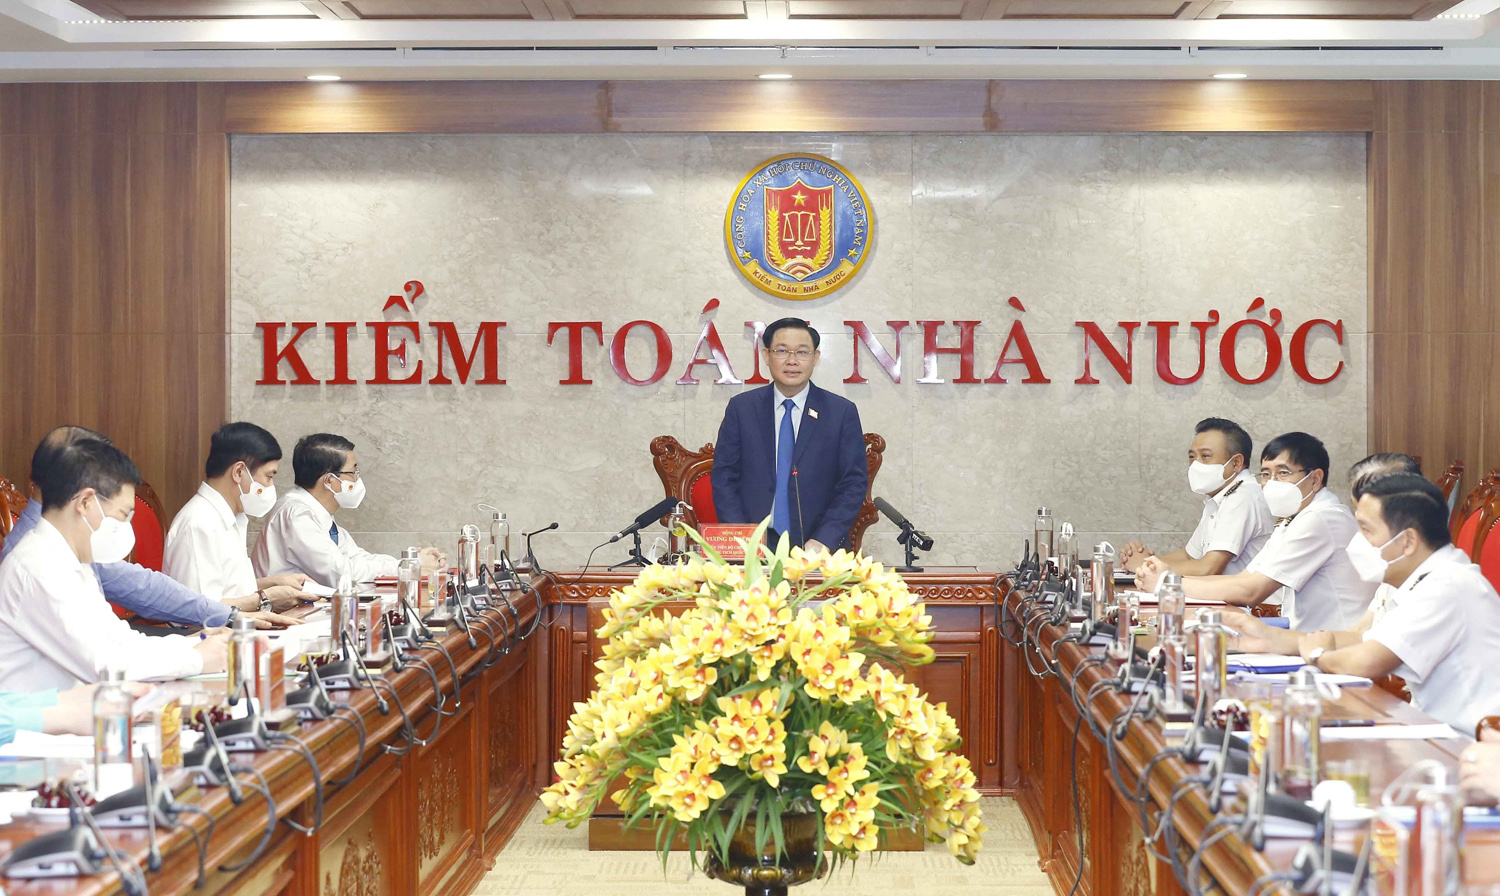 Powers and obligations of the State Audit Office of Vietnam